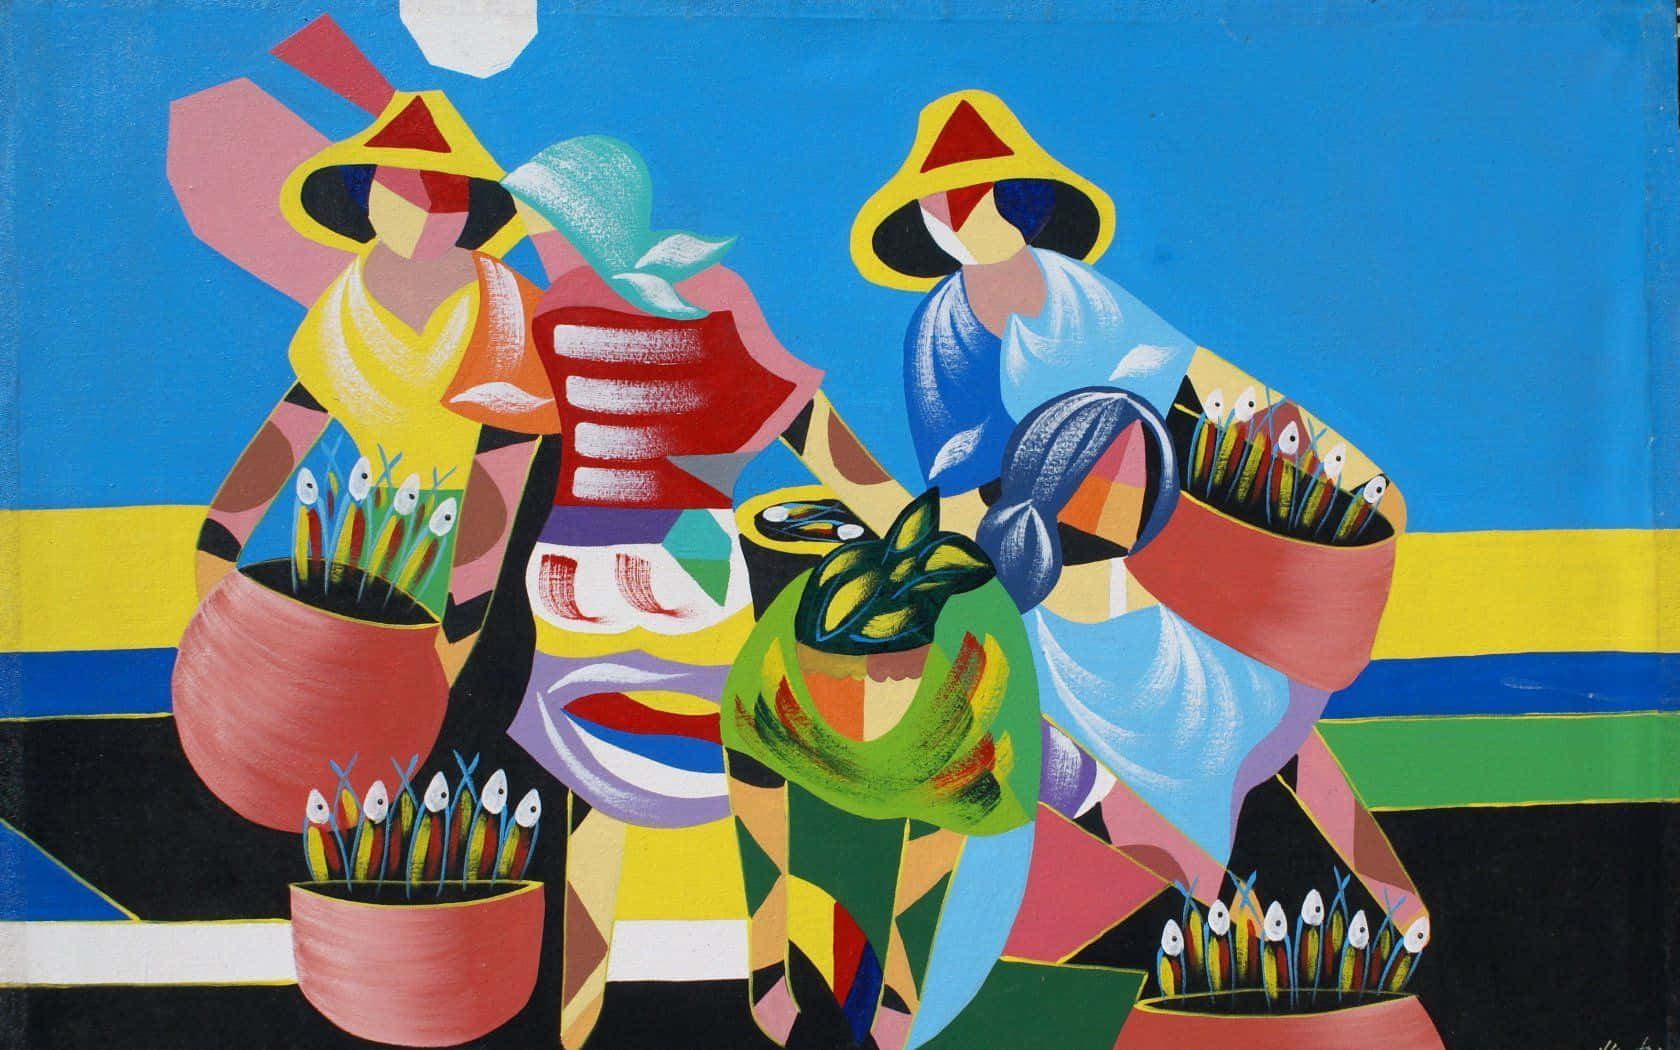 A Painting Of Women Carrying Baskets Of Paint